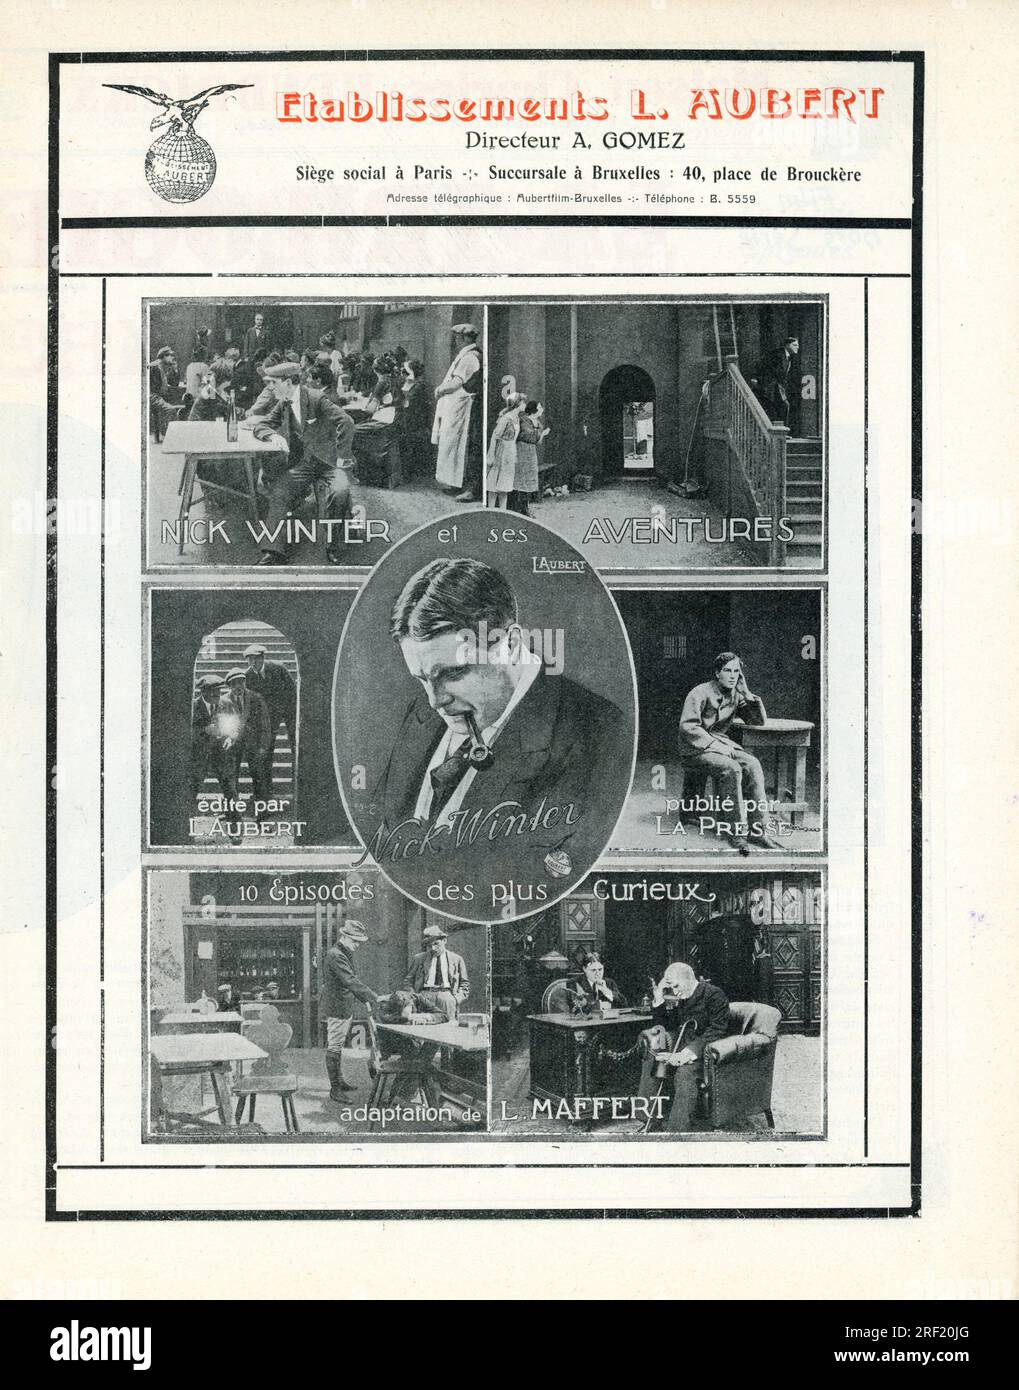 Belgian Trade Ad for GEORGES VINTER in the 10 episode French serial NICK WINTER ET SES AVENTURES (NICK WINTER AND HIS ADVENTURES) 1921 adaptation L. Maffert Les Films Nick Winter Etablissements L. Aubert Stock Photo